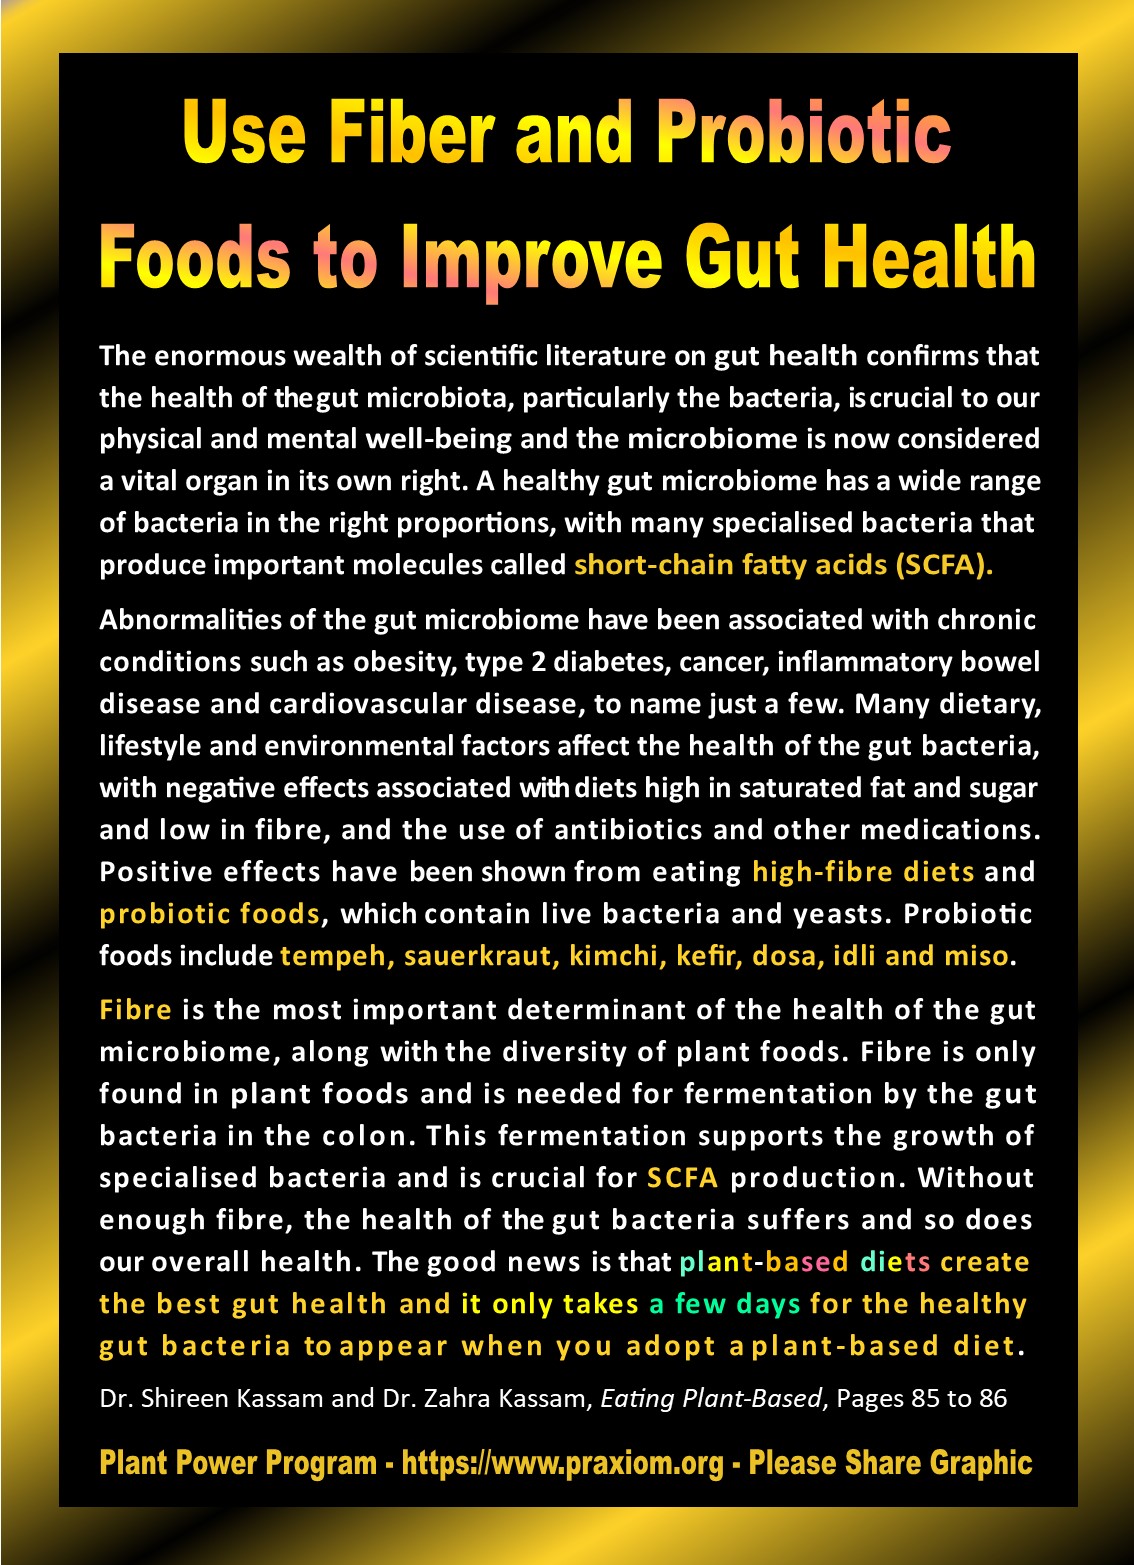 How to Improve Gut Health - Dr. Shireen Kassam and Dr. Zahra Kassam